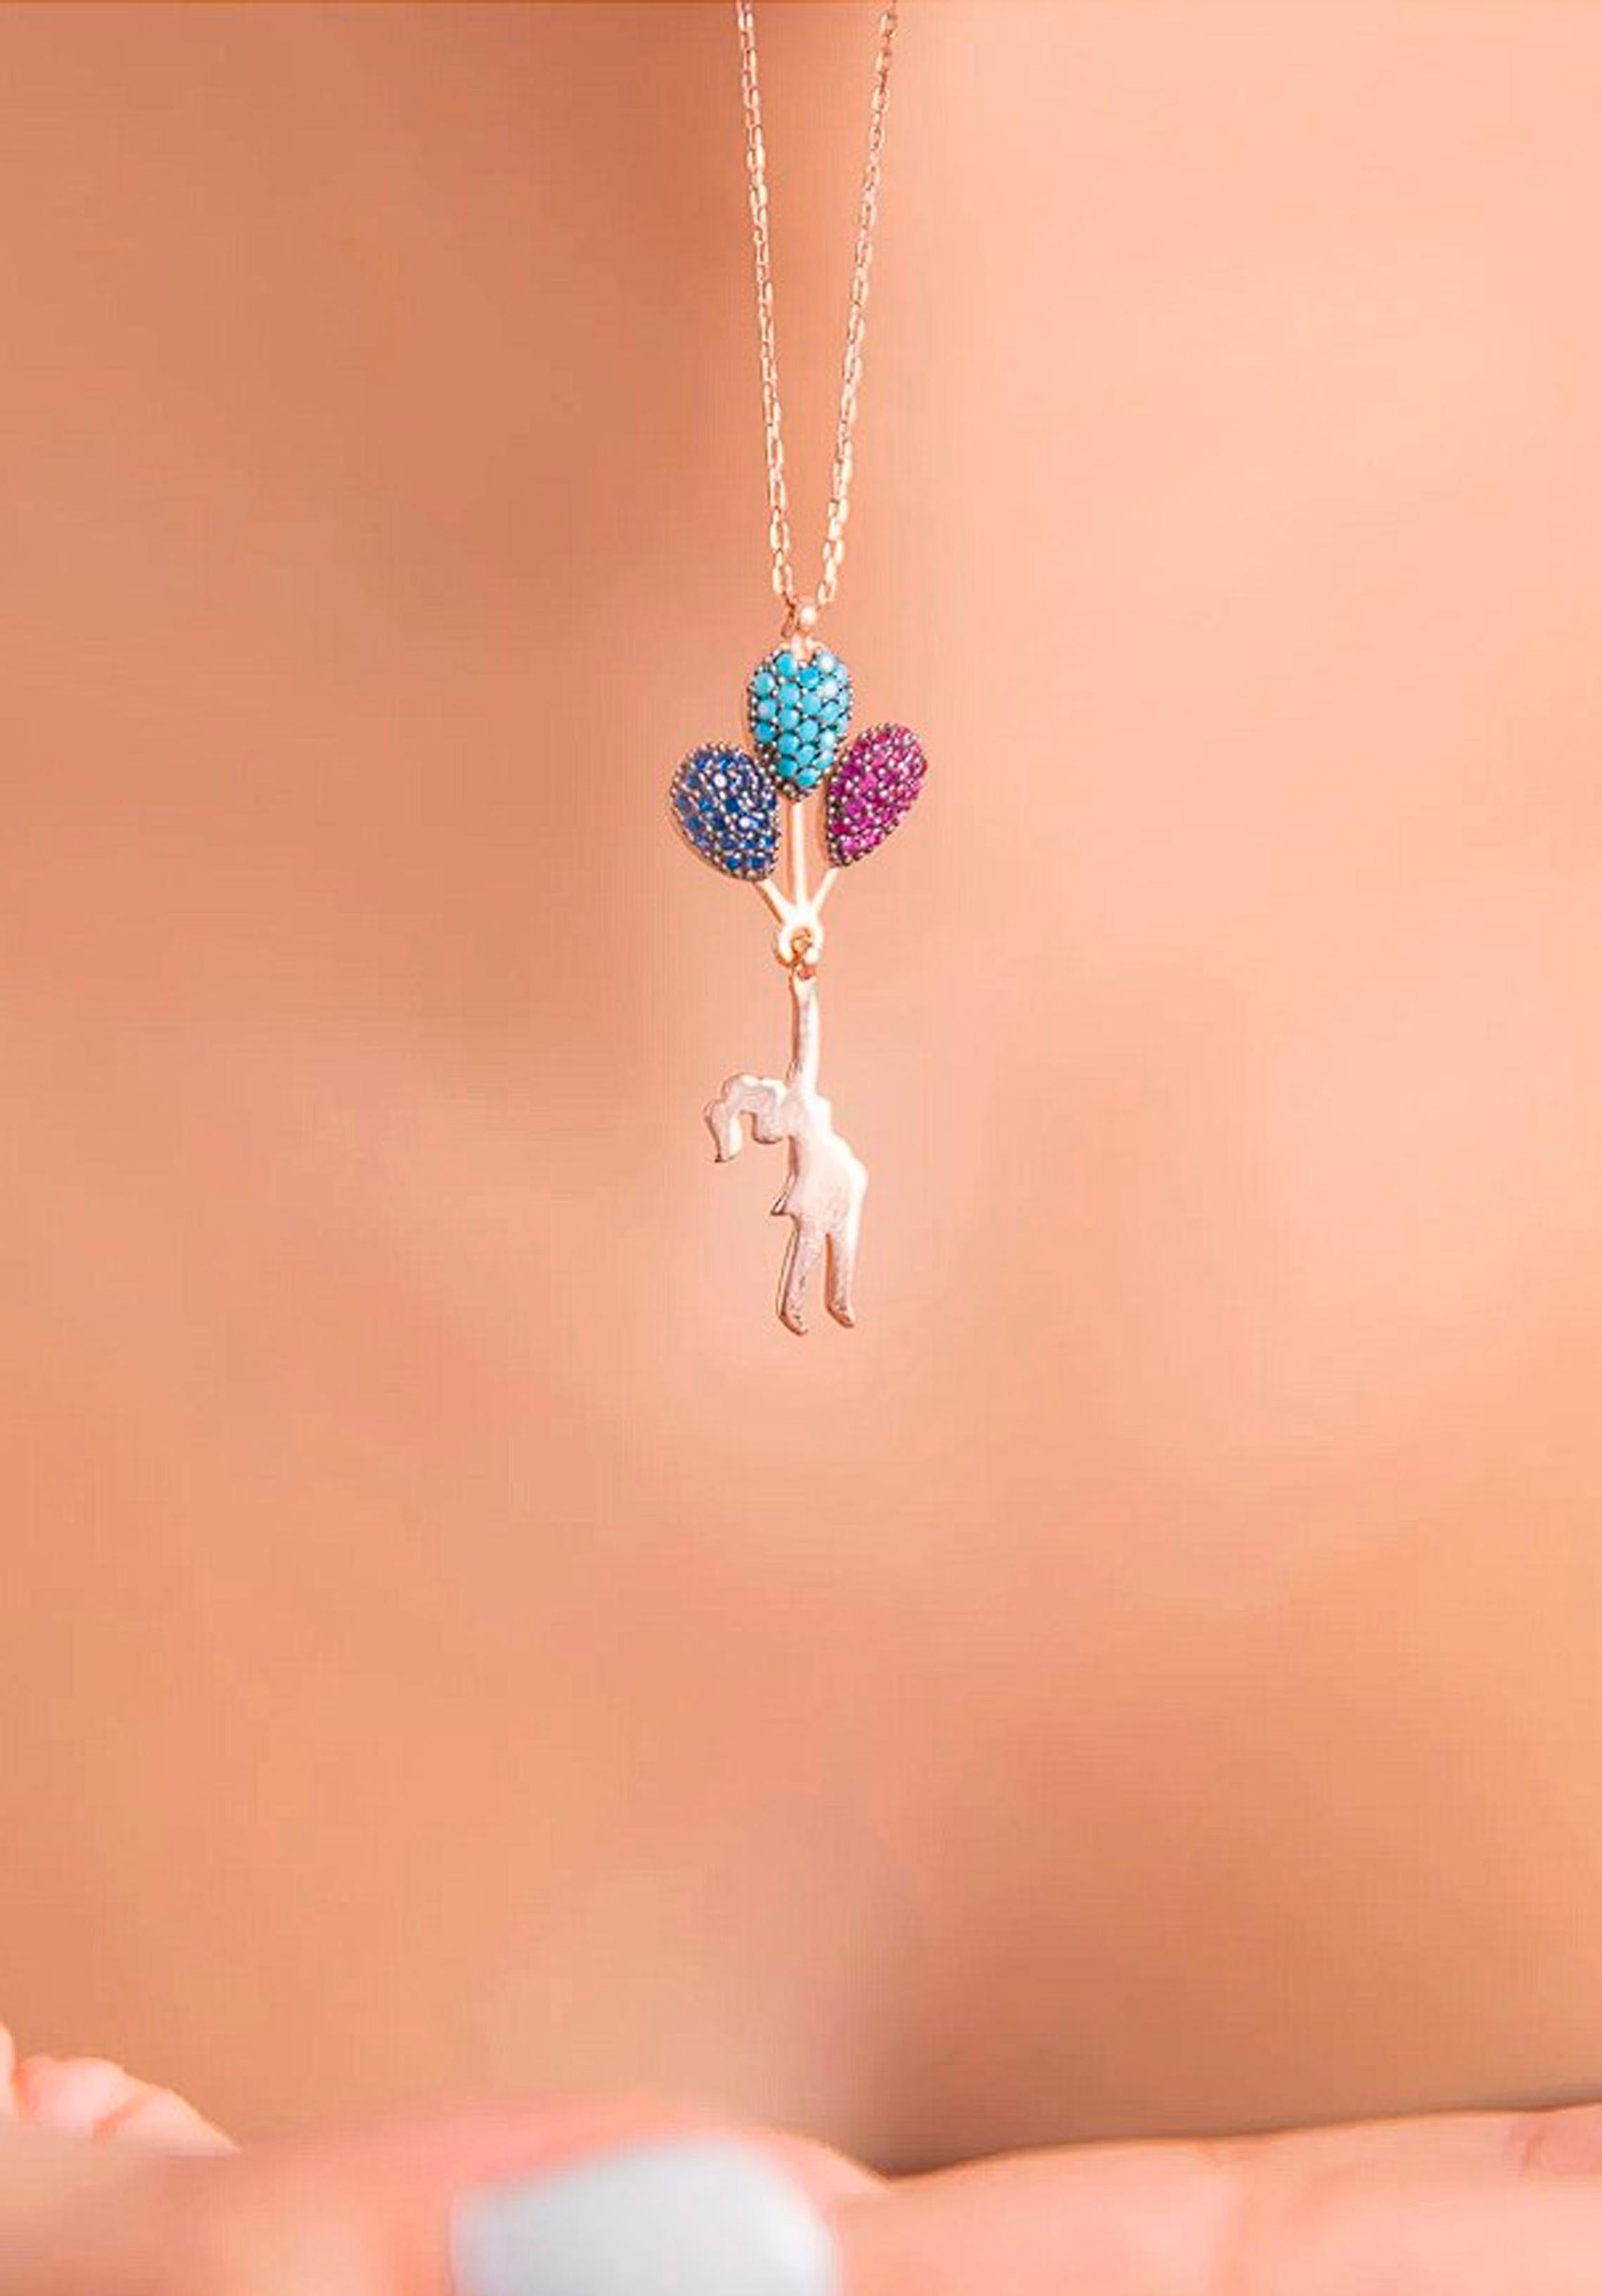 Modern Girl on baloons pendant necklace in 14k gold